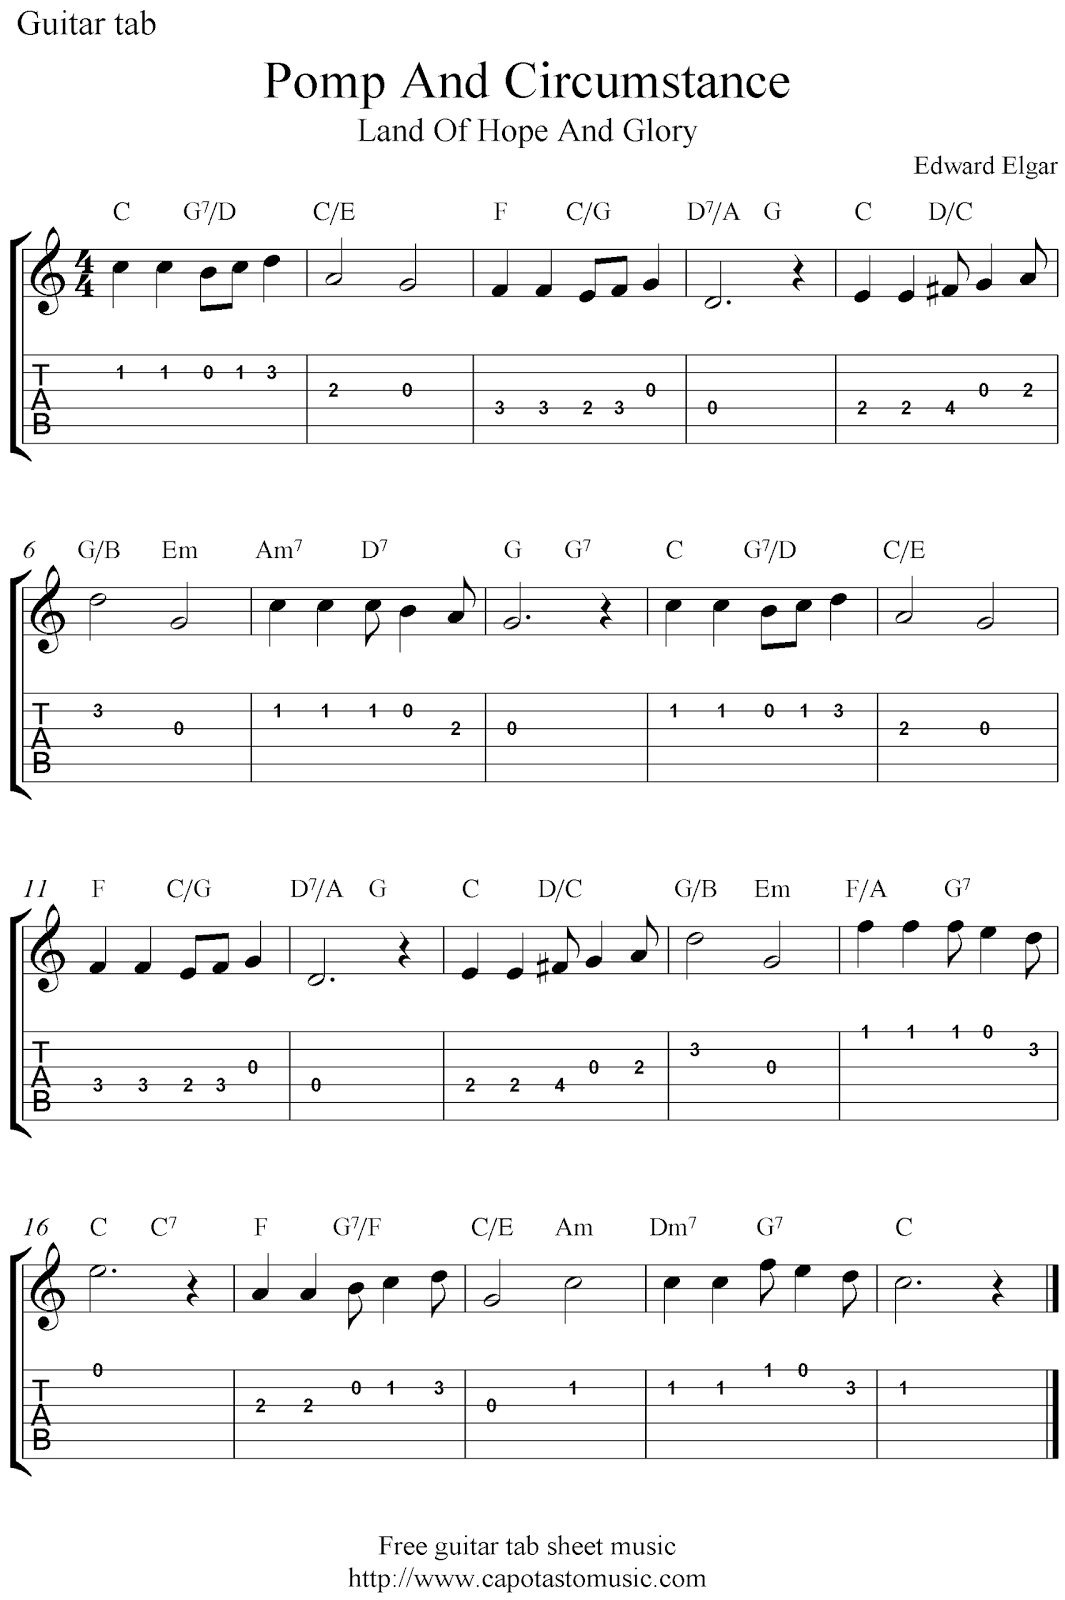 Free easy guitar tablature sheet music score, Land Of Hope And Glory